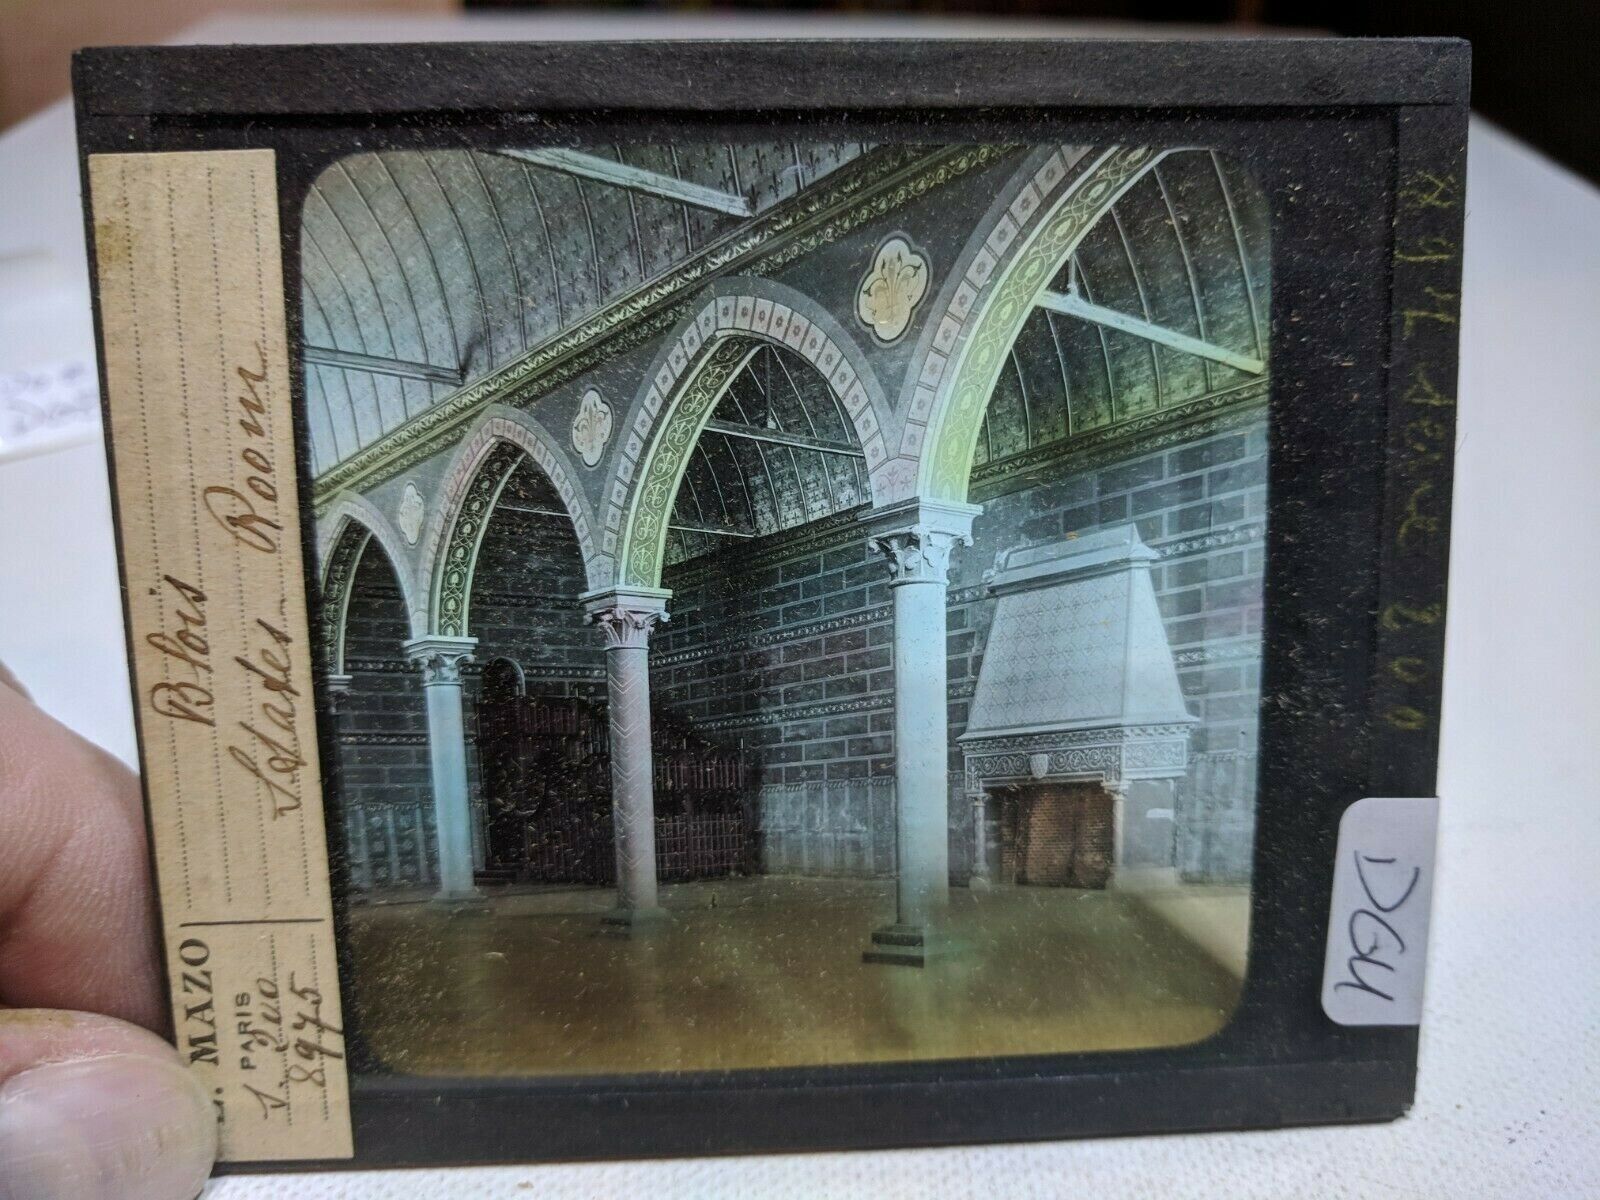 COLORED Glass Magic Lantern Slide DGT POLOIS STATES ROOM OLD HELP IDENTIFY